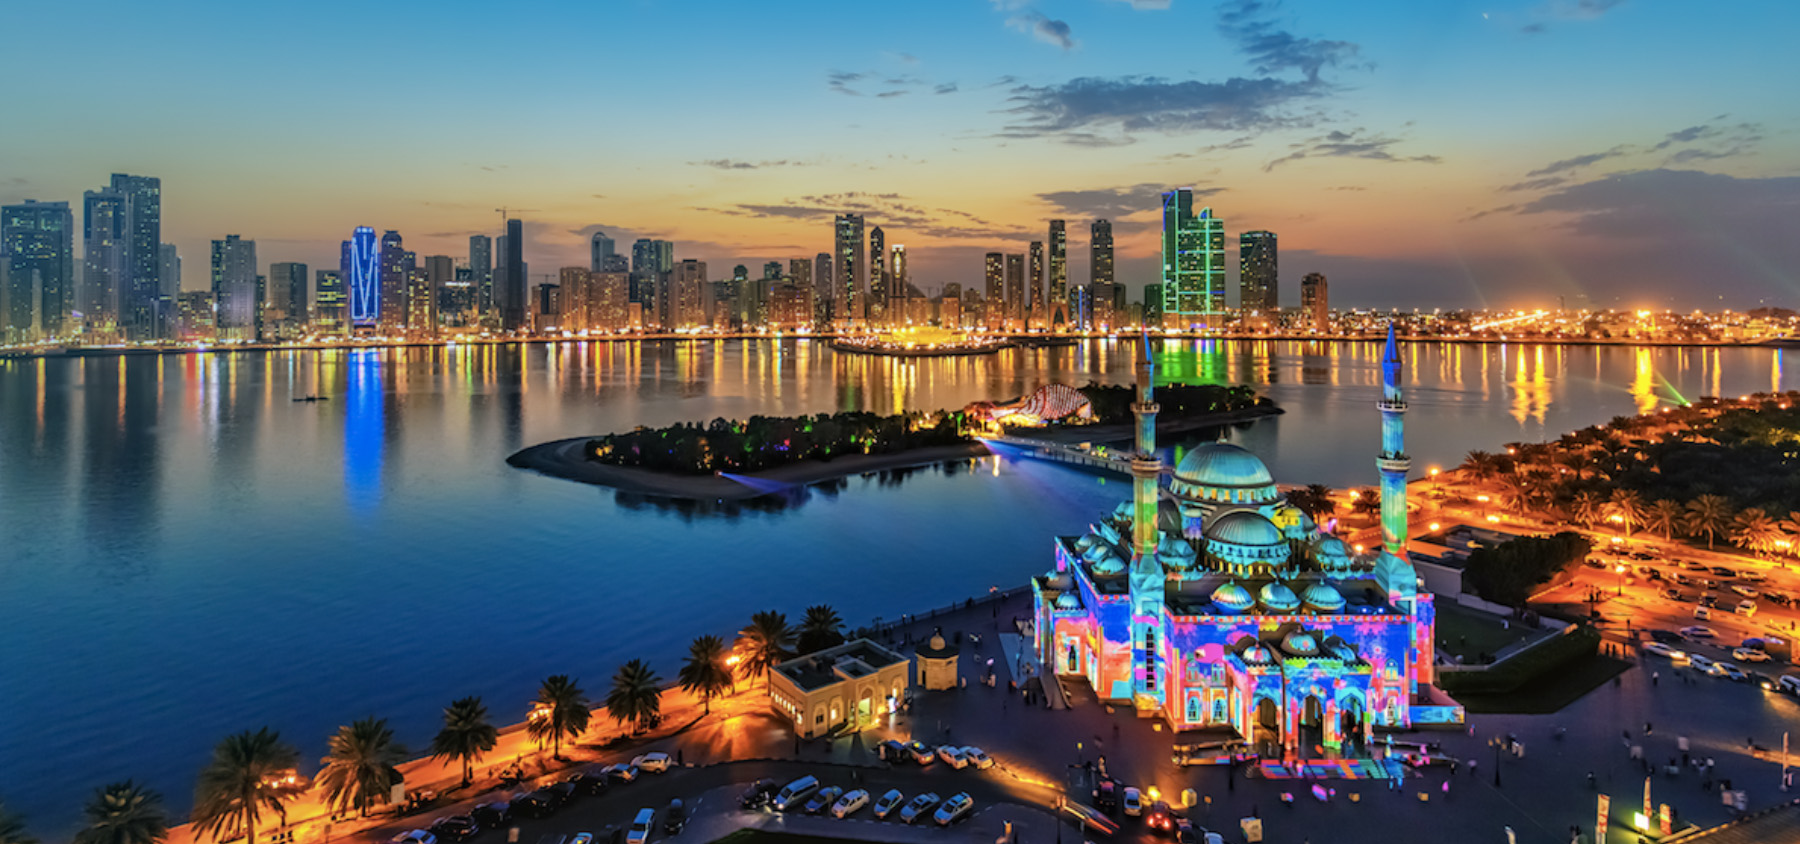 Discover the best sights in Sharjah